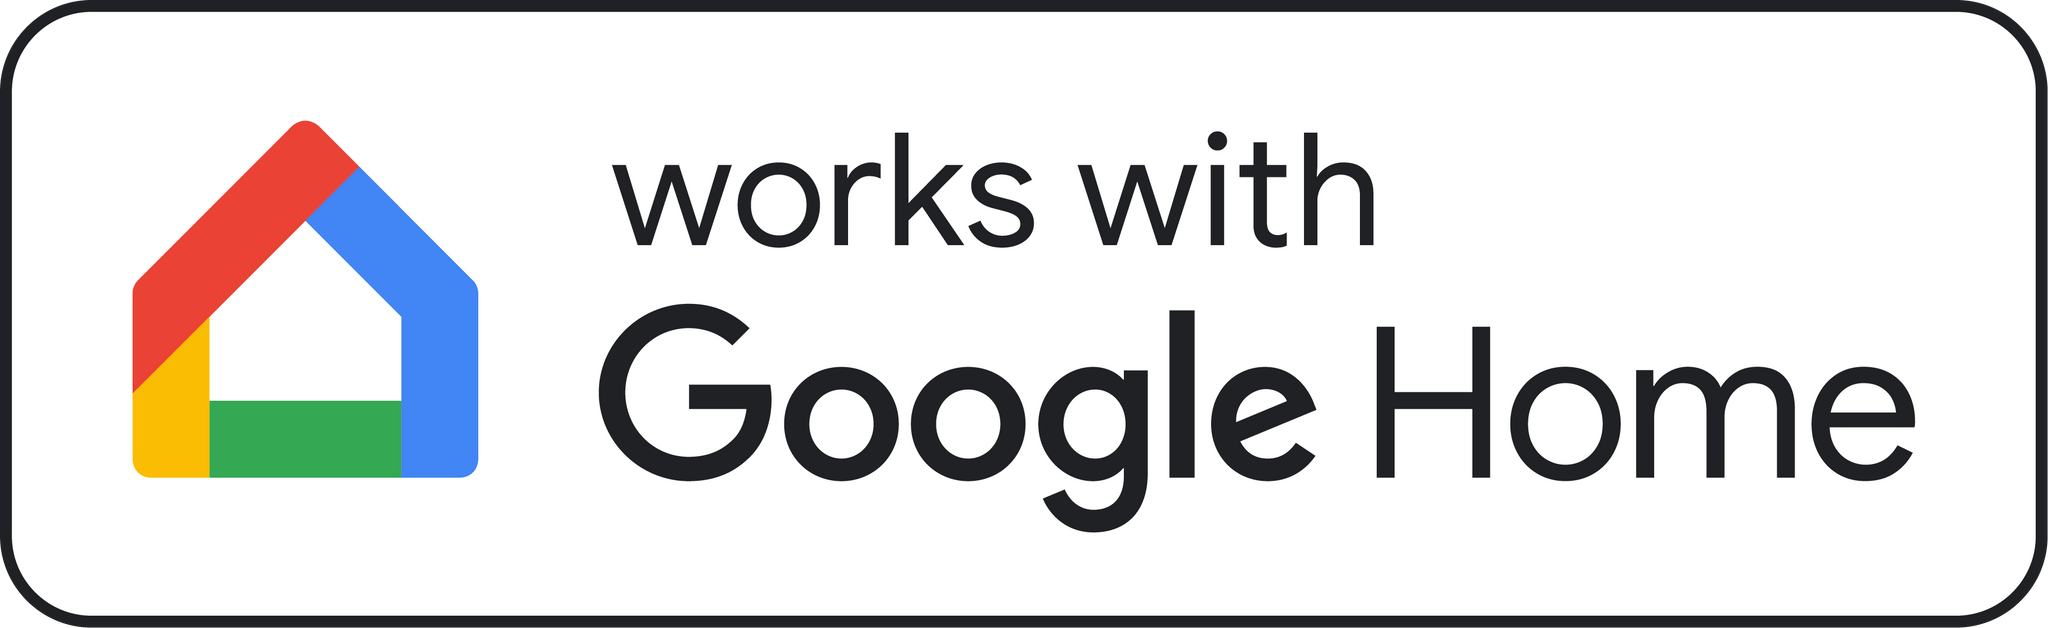 Works with Google Home Logo